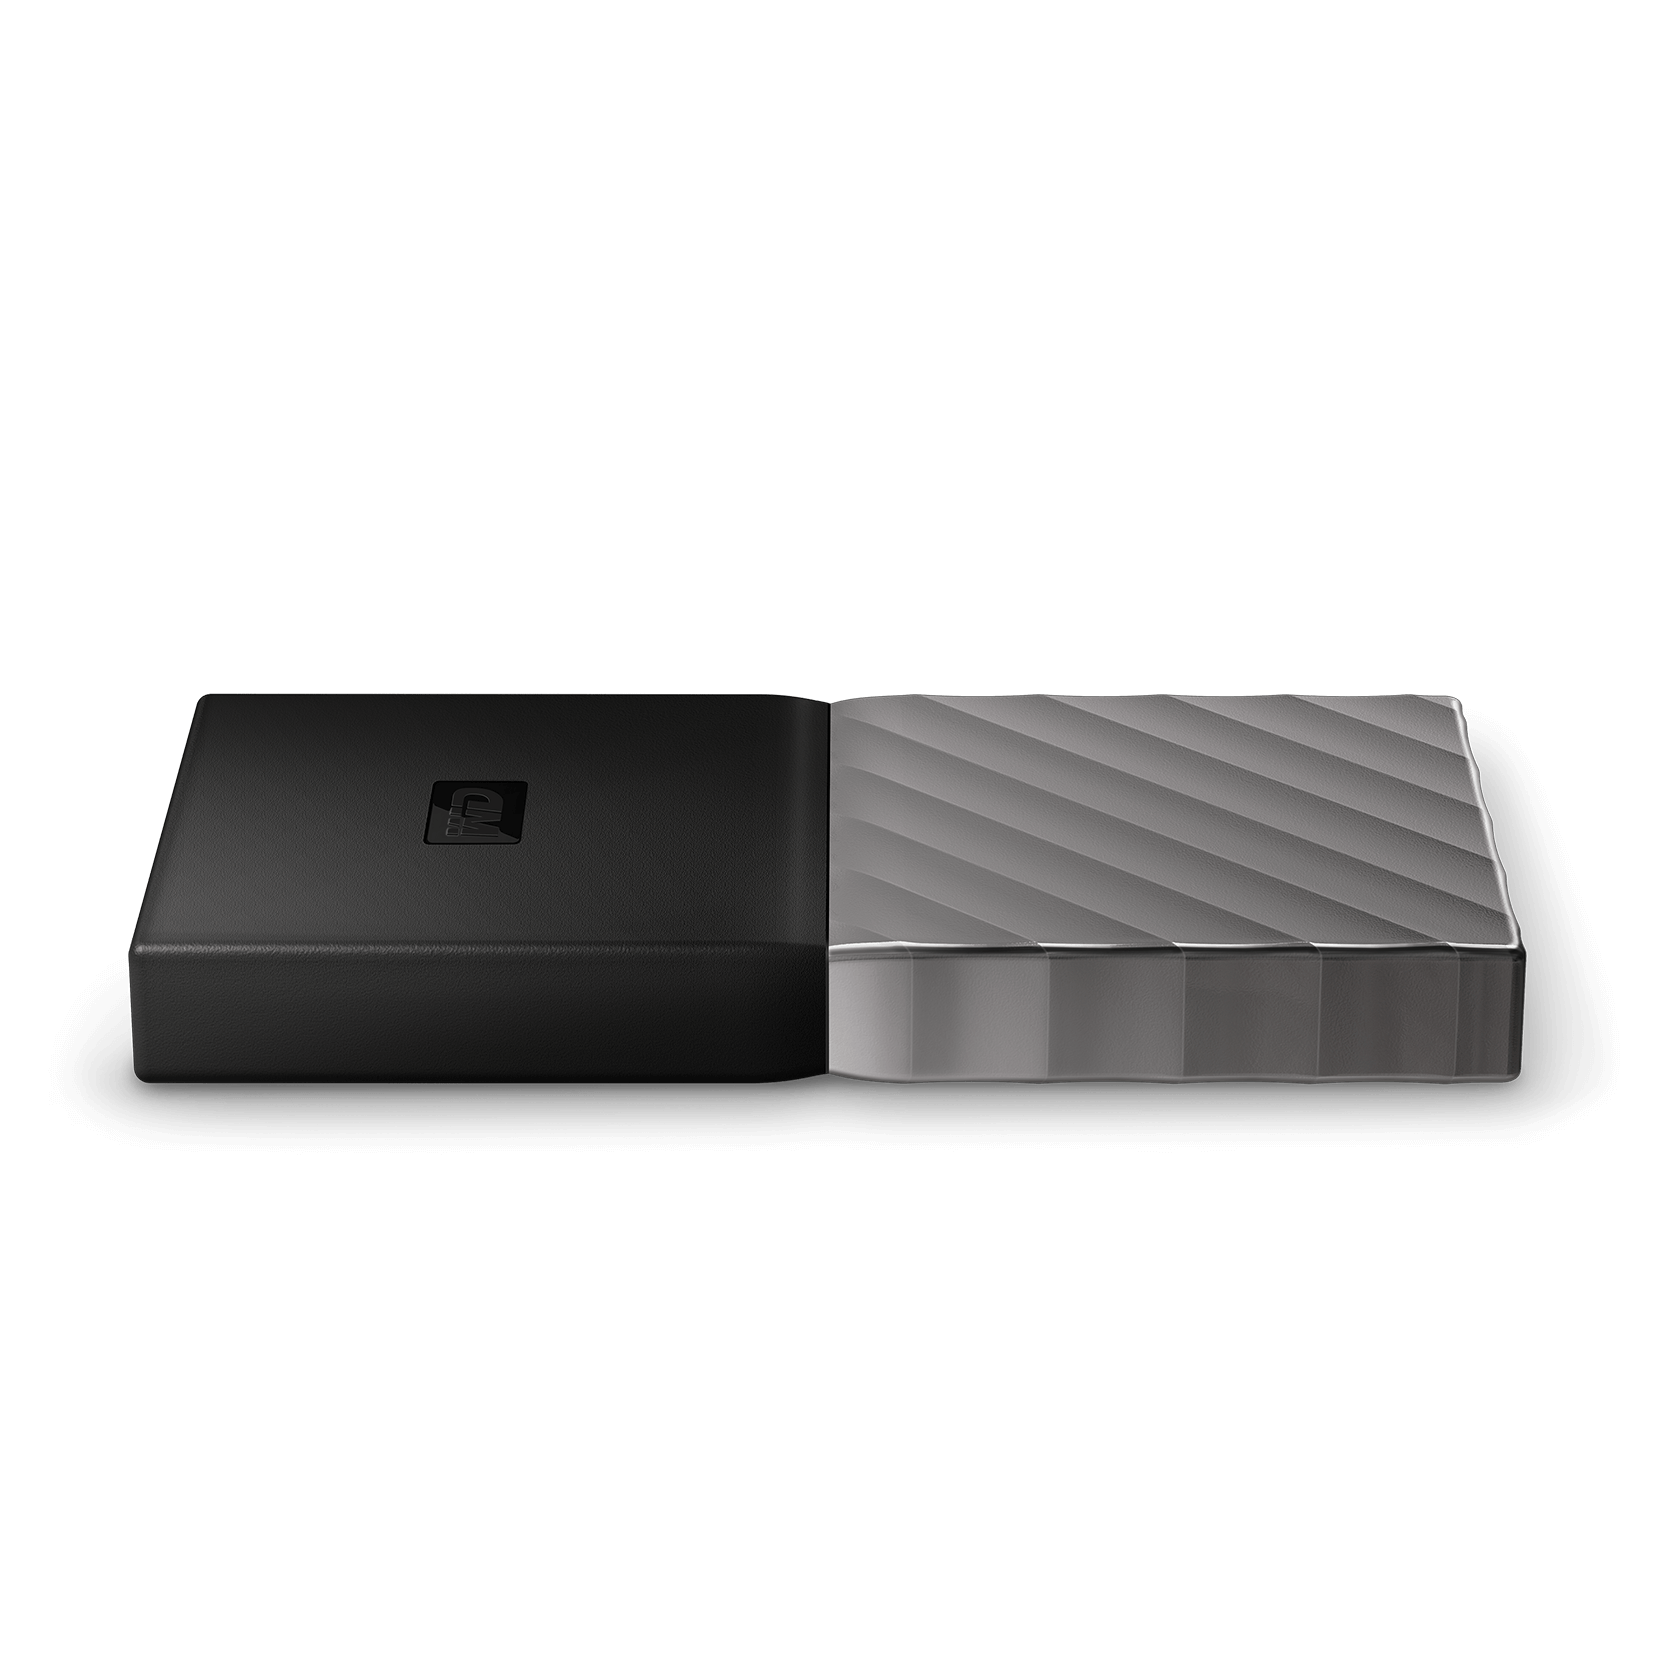 WD 256GB My Passport Portable SSD, External Solid State Drive, Read Speeds Up to 540 MB/s - WDBKVX2560PSL-WESN - image 4 of 7